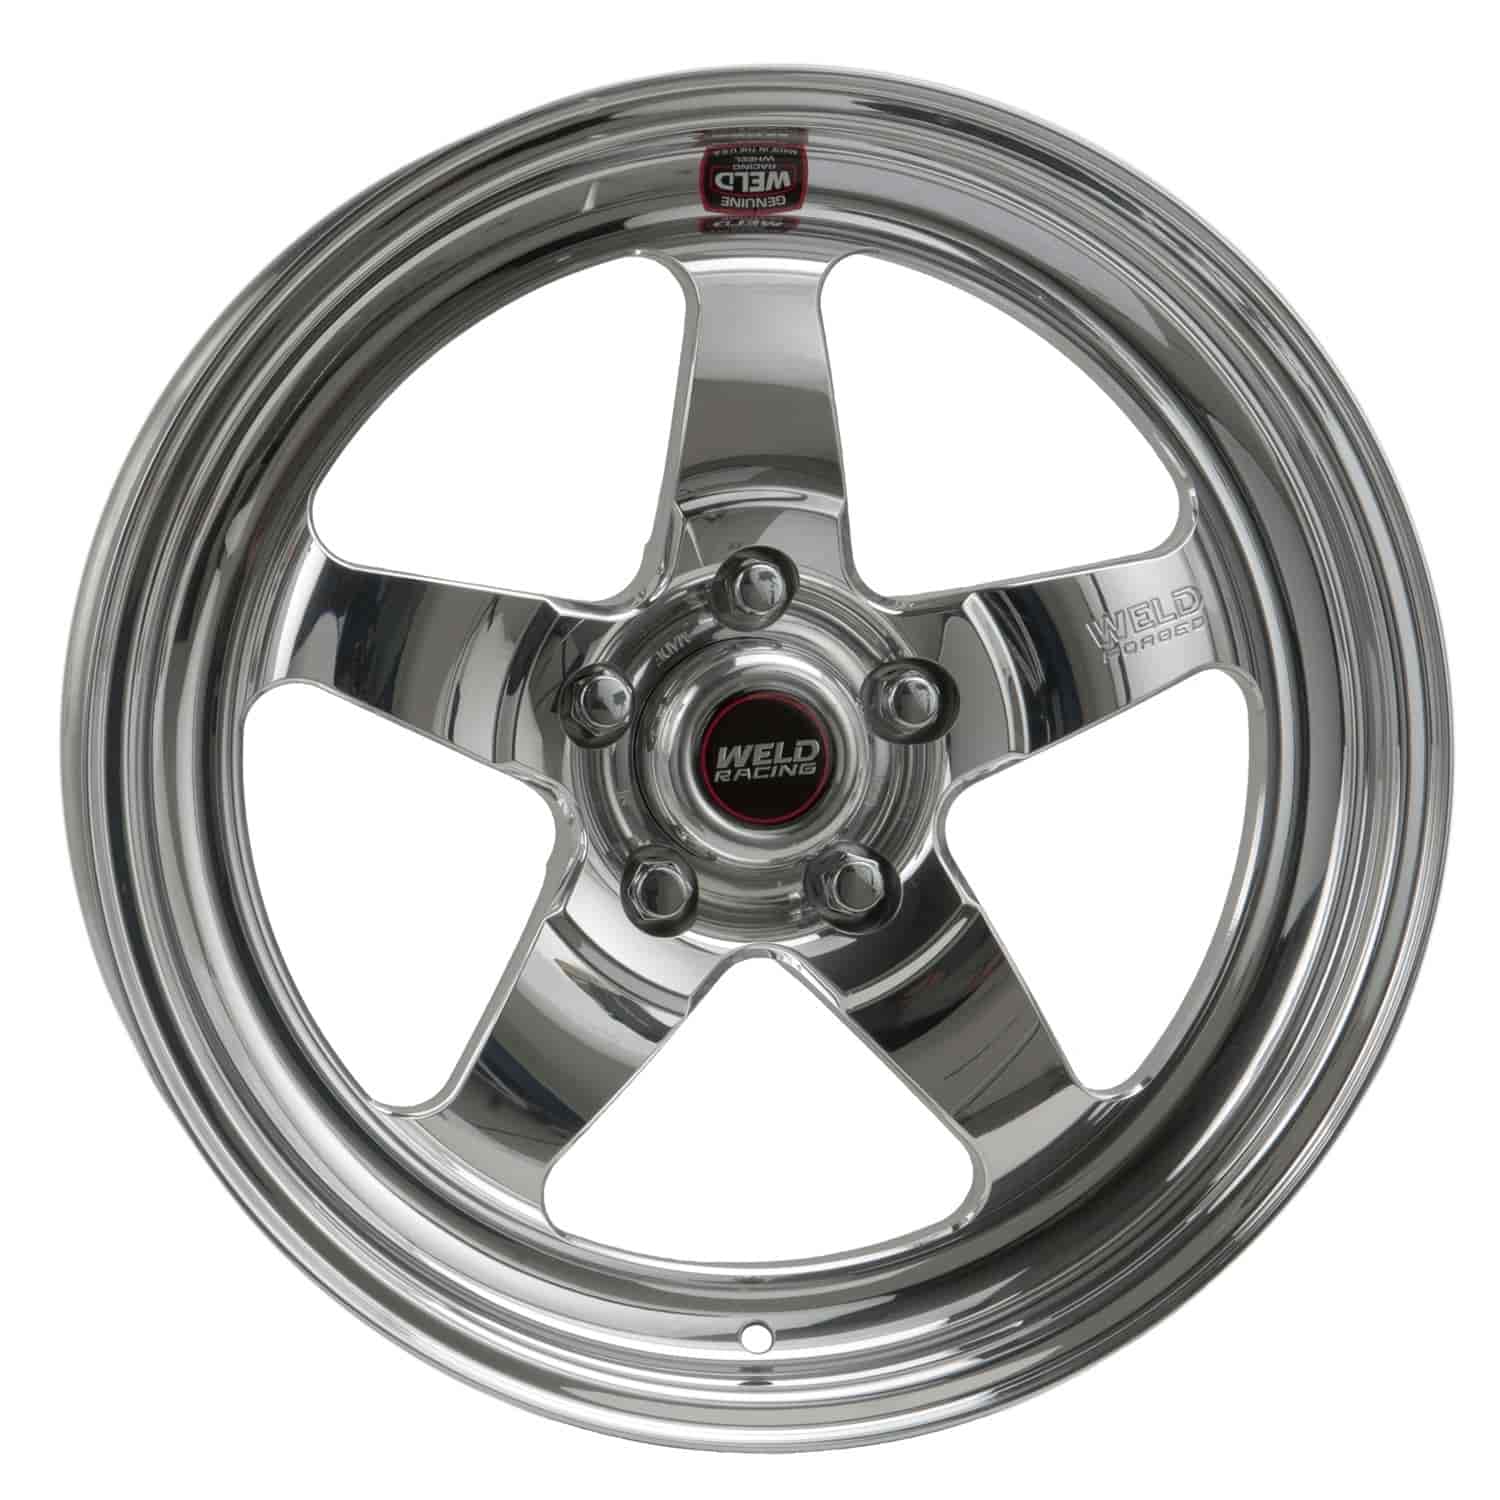 RT-S Series Wheel Size: 15" x 10" Bolt Circle: 5 x 4-1/2" Rear Spacing: 5-1/2" Offset: -3.49mm